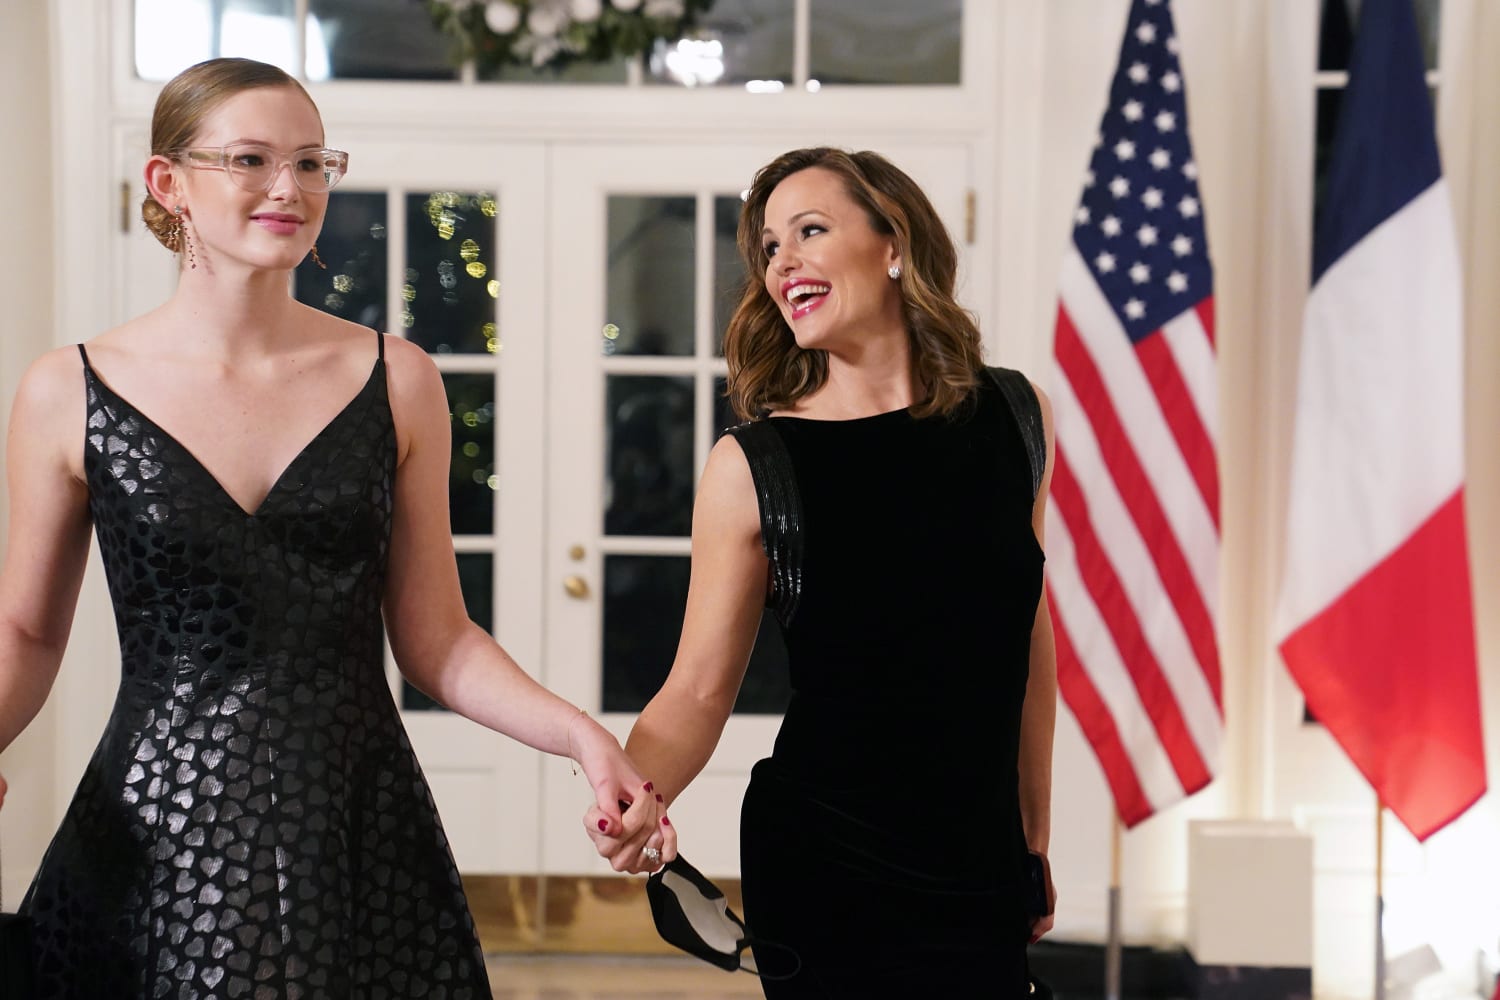 Jennifer Garner and Daughter Are Twinning at White House State Dinner